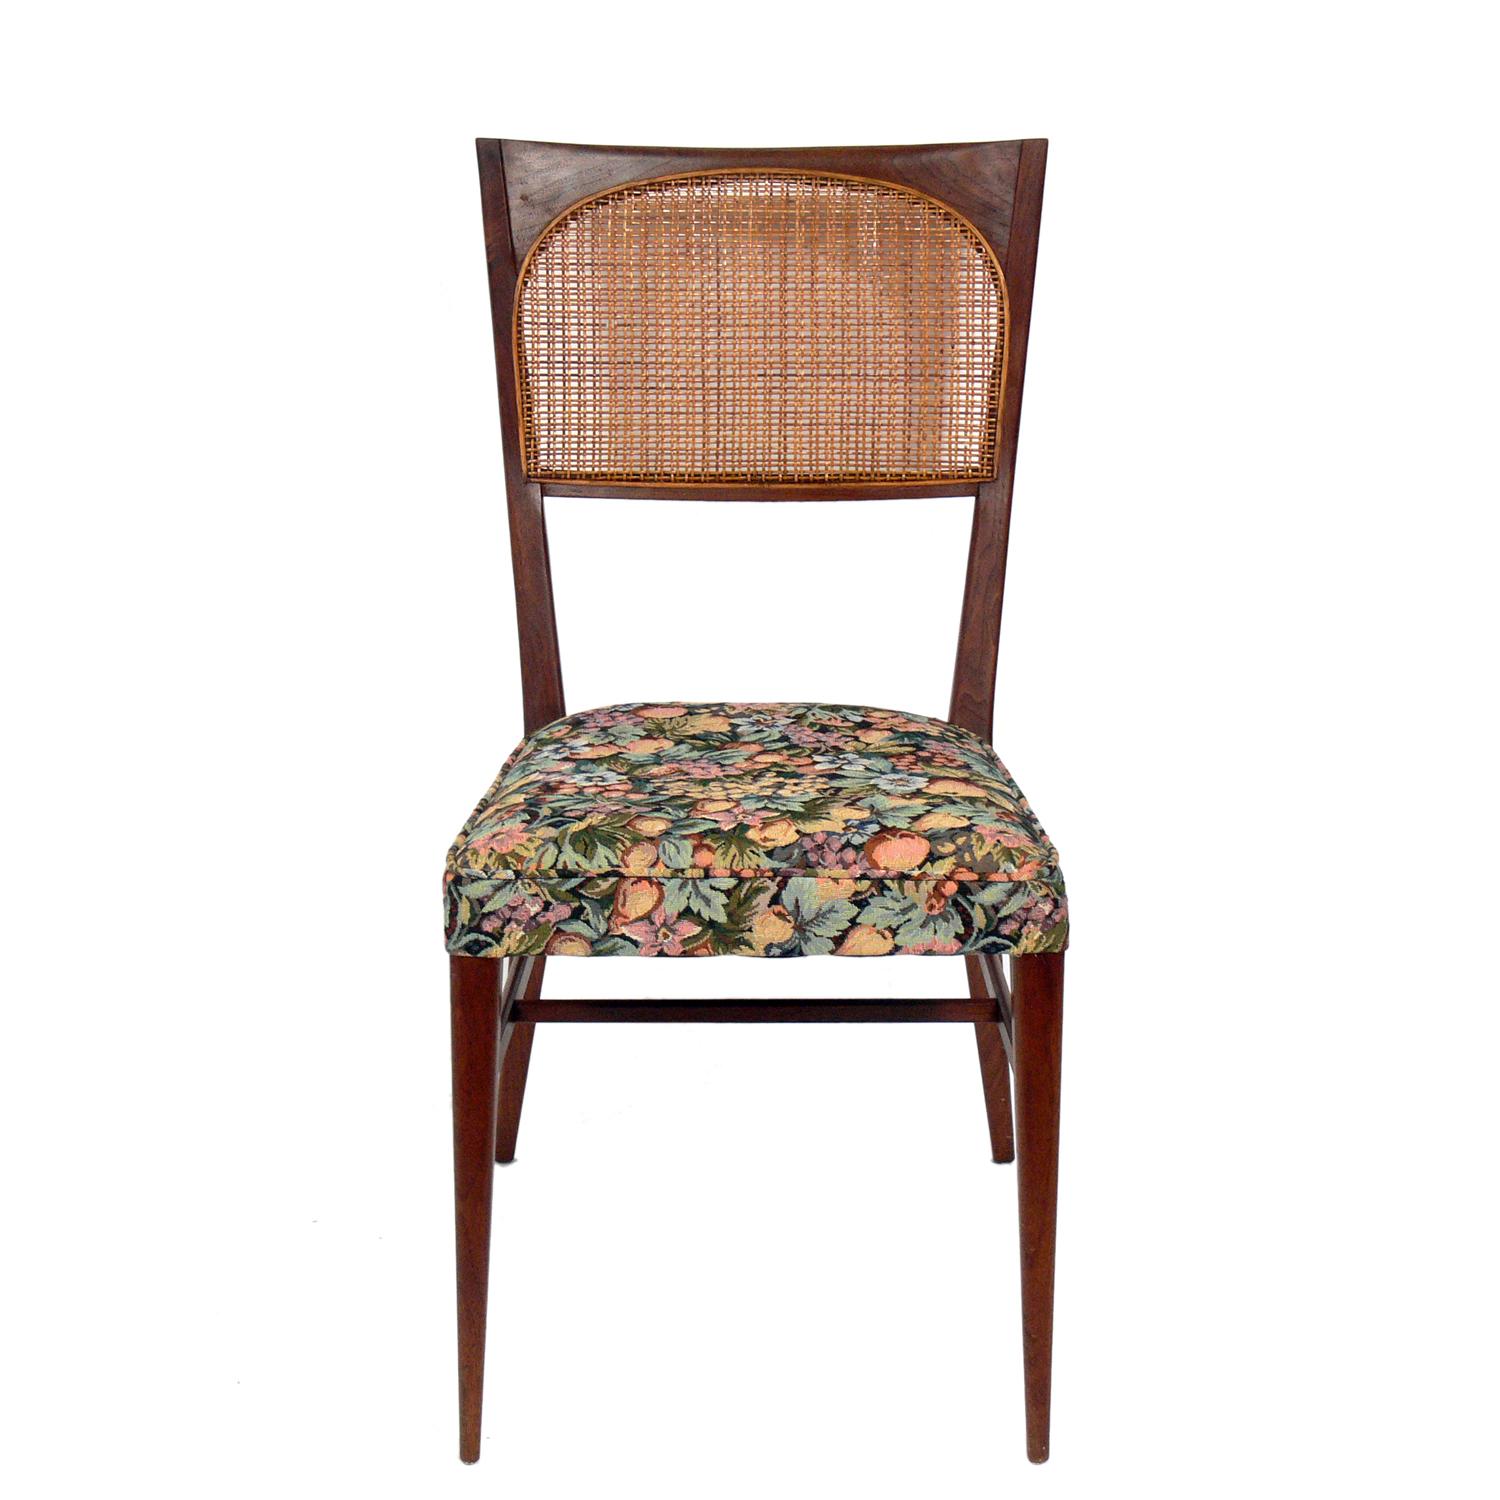 Set of eight Mid-Century Modern dining chairs, designed by Paul McCobb, American, circa 1950s. The set consists of one armchair and seven side chairs. Wood frames recently cleaned and oiled. The seats are currently being reupholstered and can be